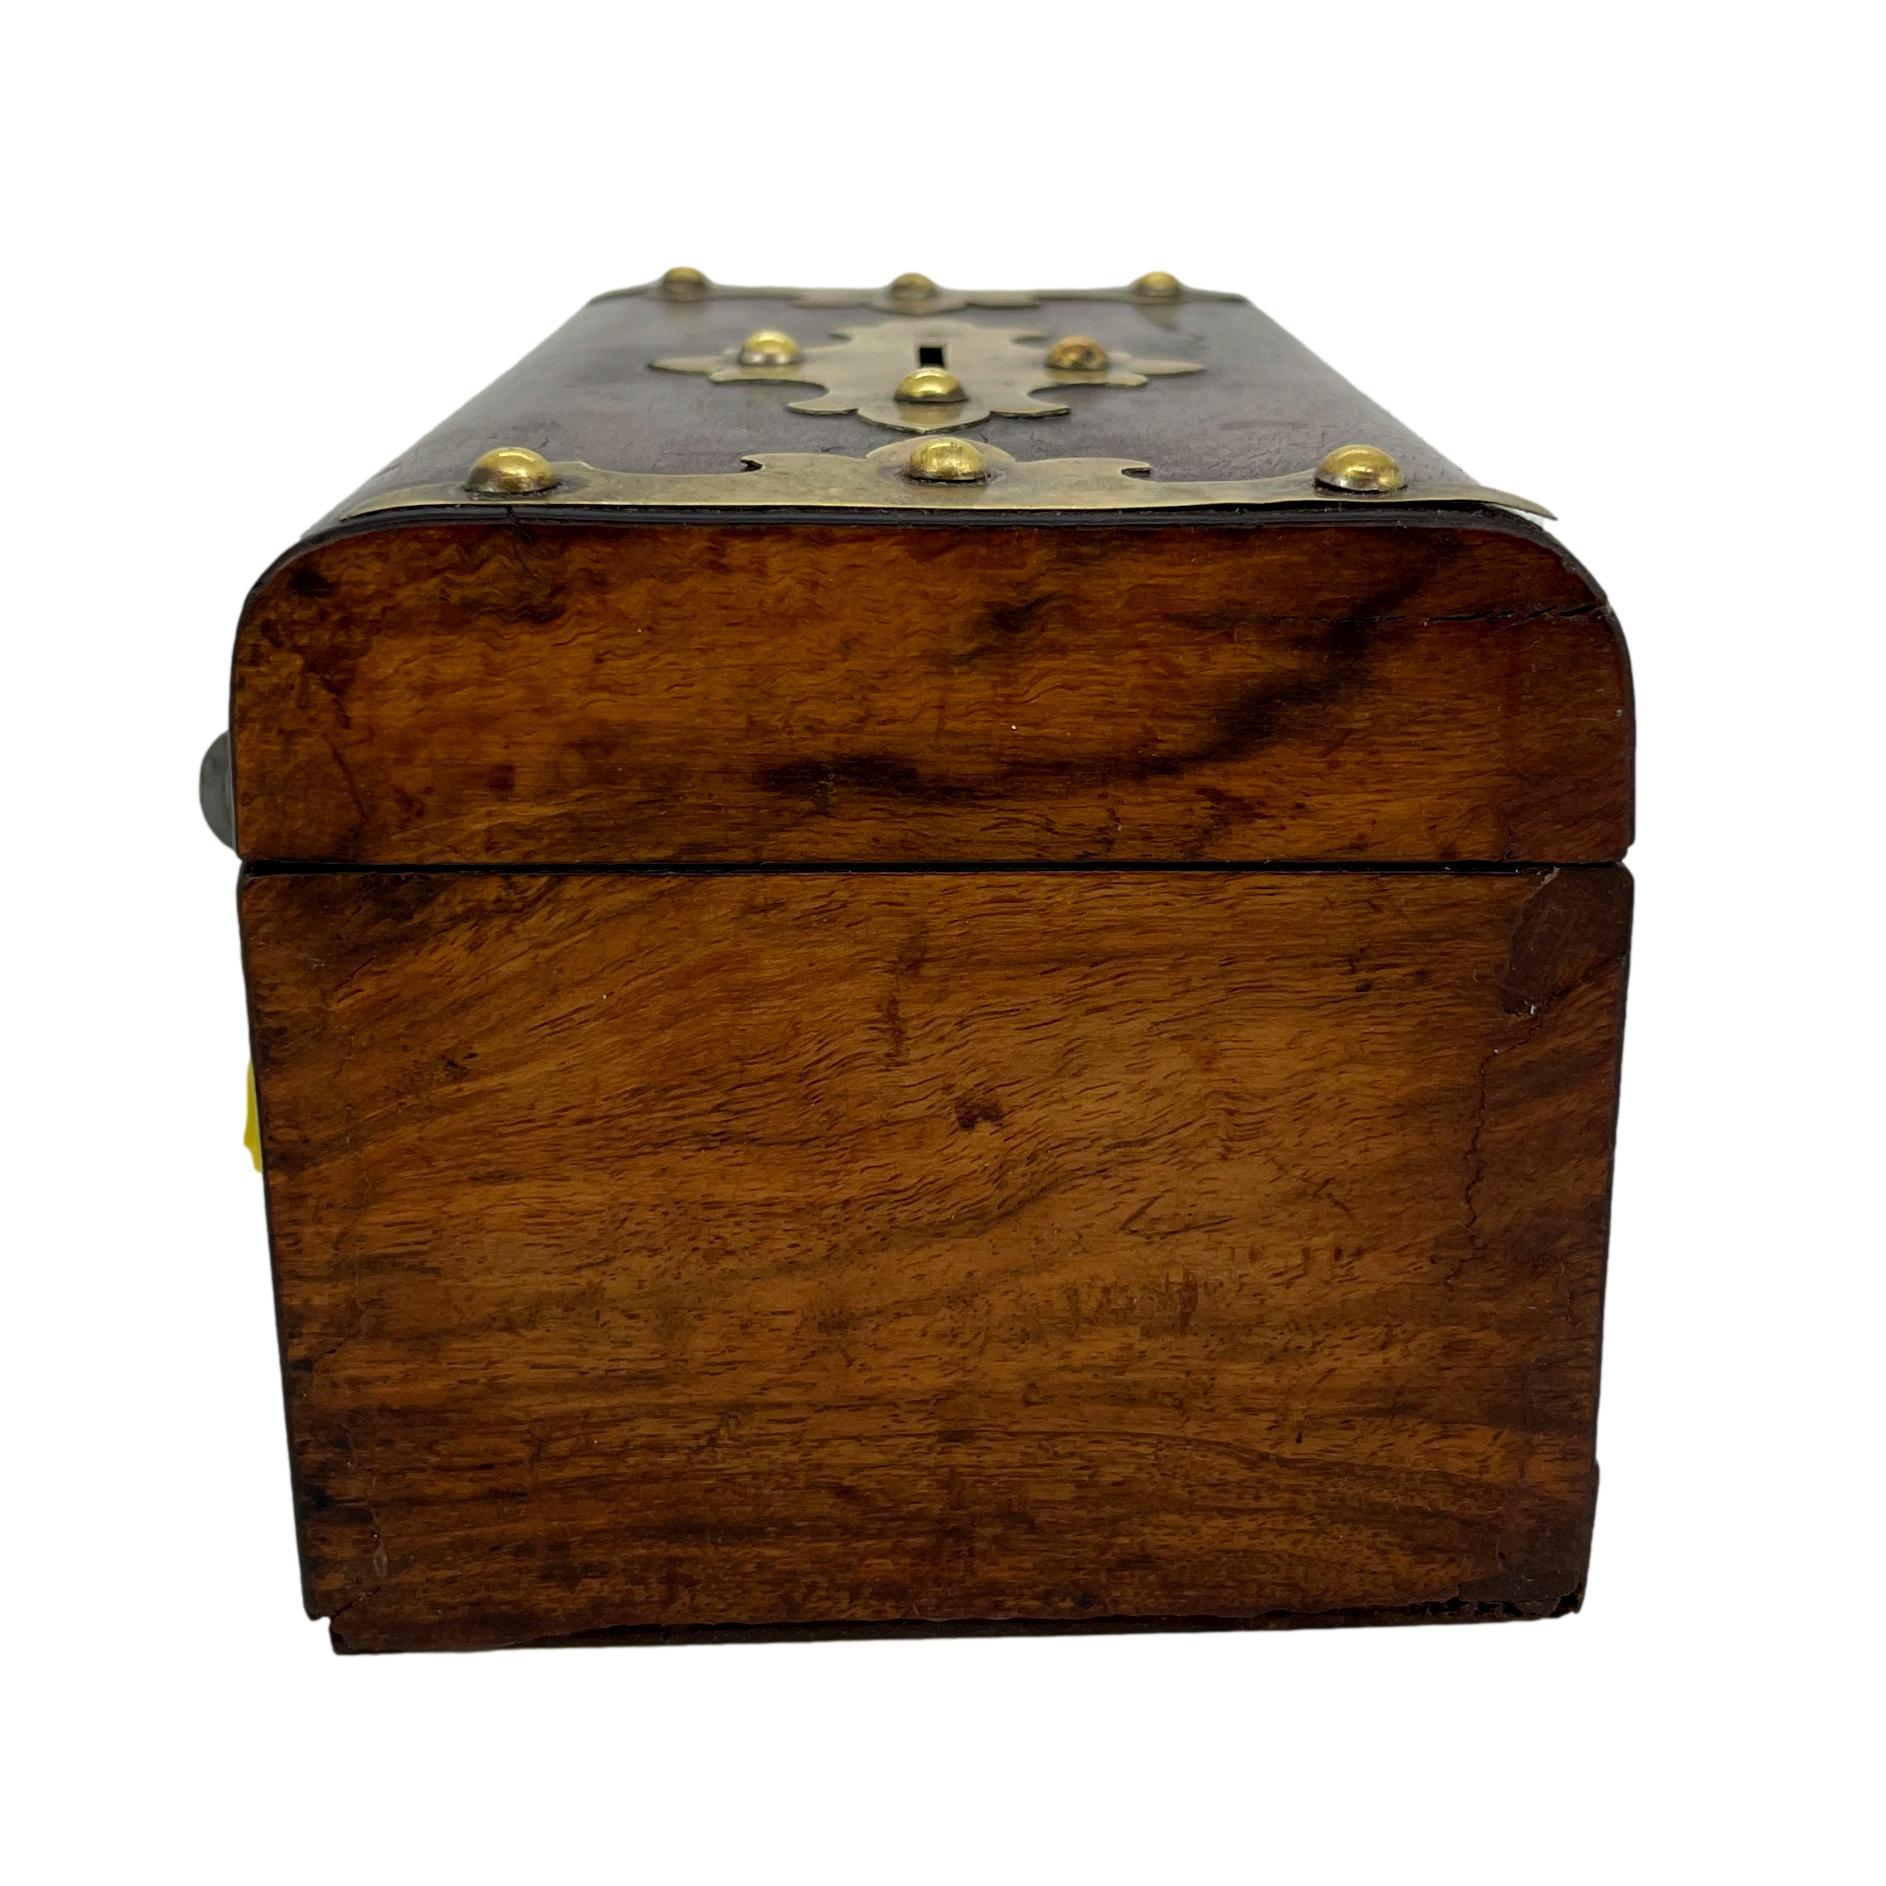 Victorian Burl Walnut and Brass Embellished Money Box, English, ca. 1860 For Sale